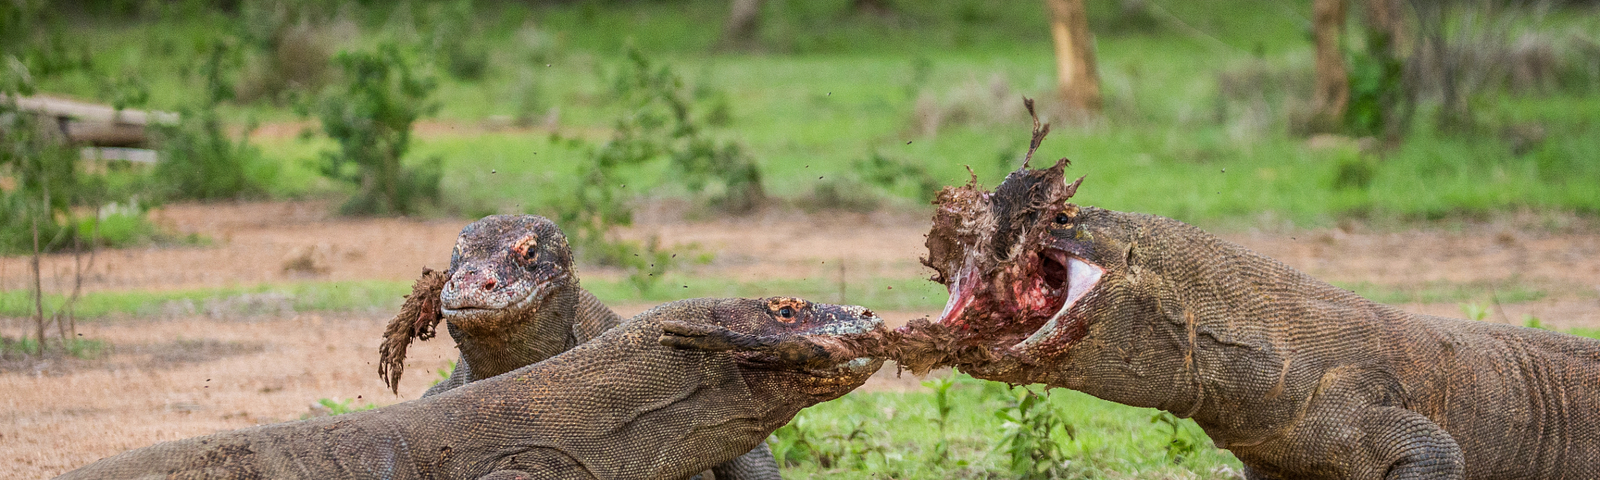 Three Komodo dragons feasting on a large piece of prey. The two dragons on the left are tearing at the flesh, while the one on the right has a large chunk of meat in its mouth. The scene takes place in a grassy, forested area with a dirt ground.